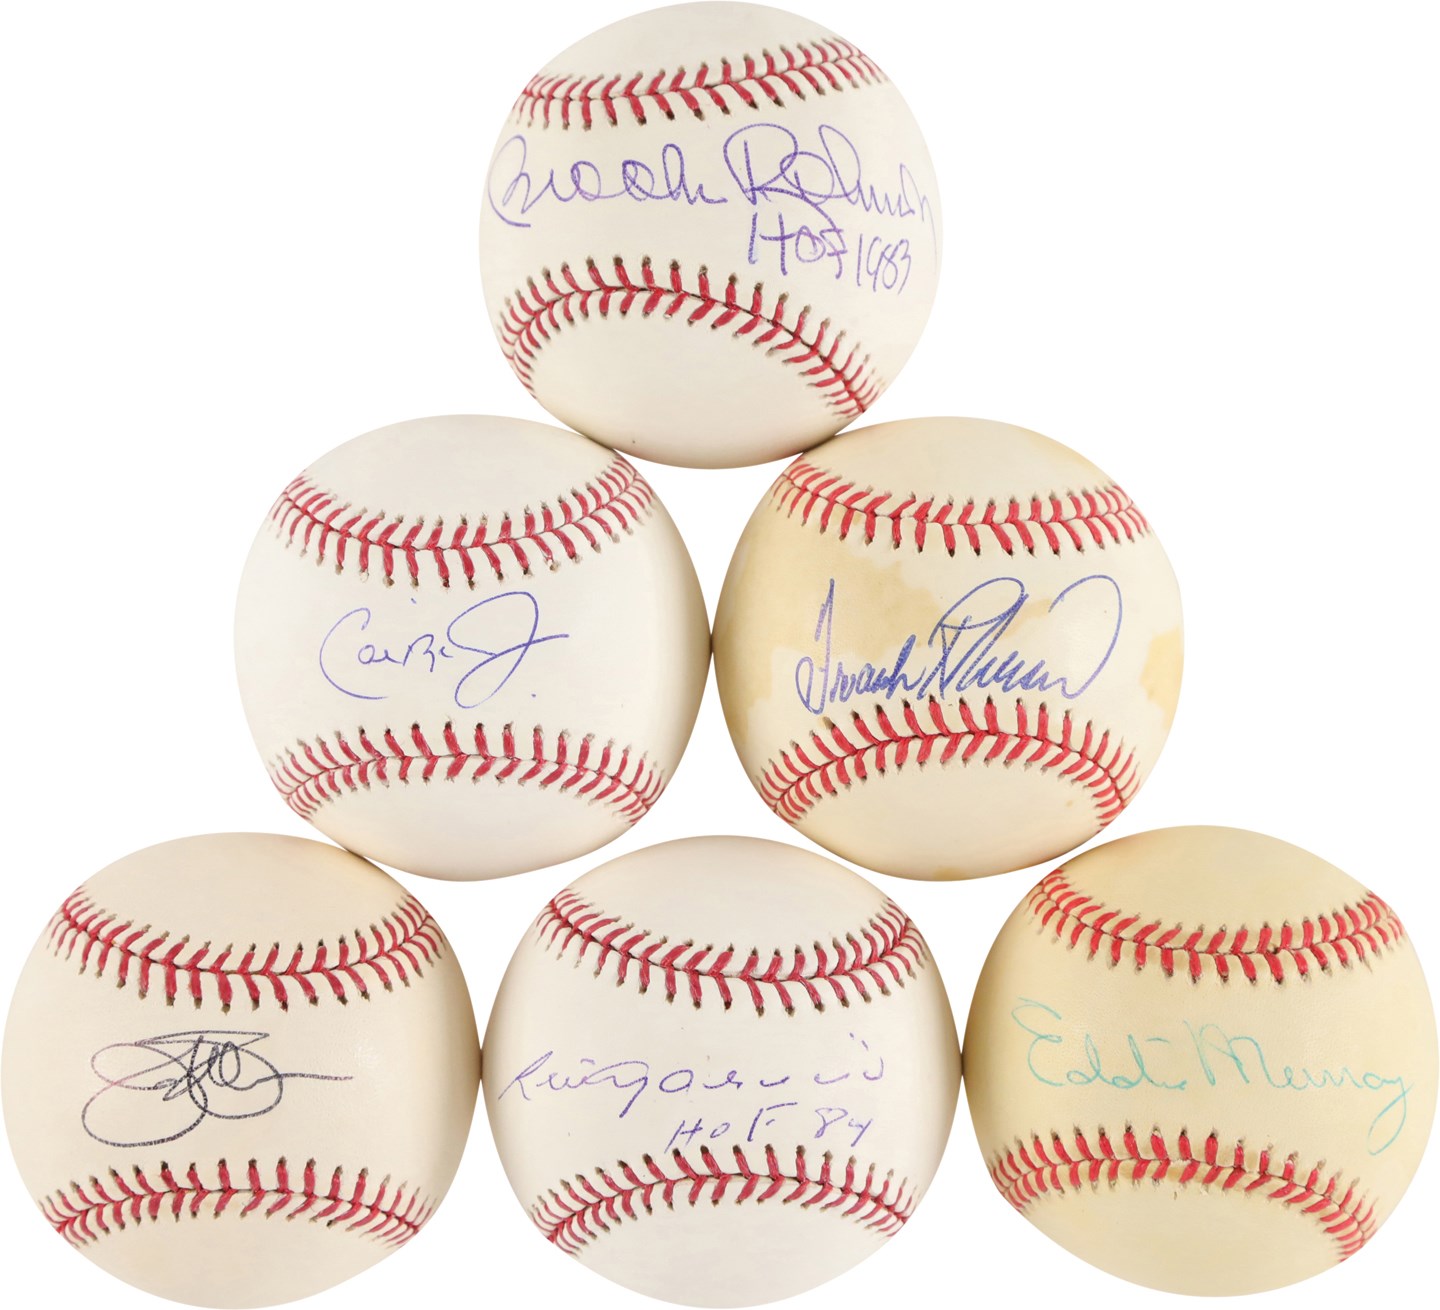 - Baltimore Orioles Hall of Famers & Stars Signed Baseball Collection (45)